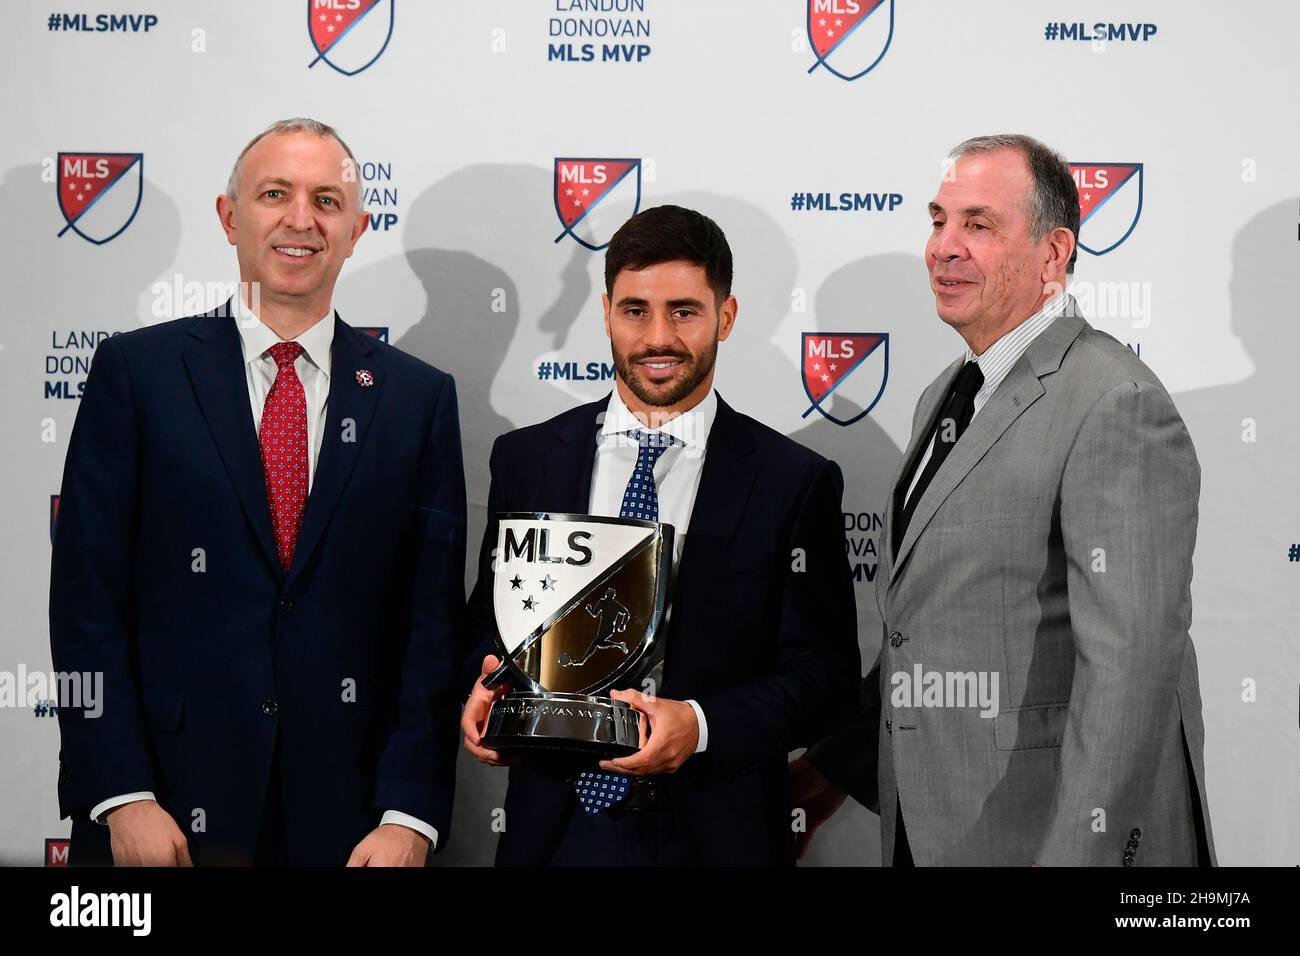 Foxborough Massachusetts, USA. 7th Dec, 2021. New England Revolution midfielder Carles Gil (middle) poses with Revolution president Brian Bilello (L) and head coach Bruce Arena (R) at the 2021 Landon Donovan MLS Most Valuable Player award ceremony held at Gillette Stadium in Foxborough Massachusetts. New England Revolution midfielder Carles Gil was named the 2021 Landon Donovan Most Valuable Player. Eric Canha/CSM/Alamy Live News Stock Photo